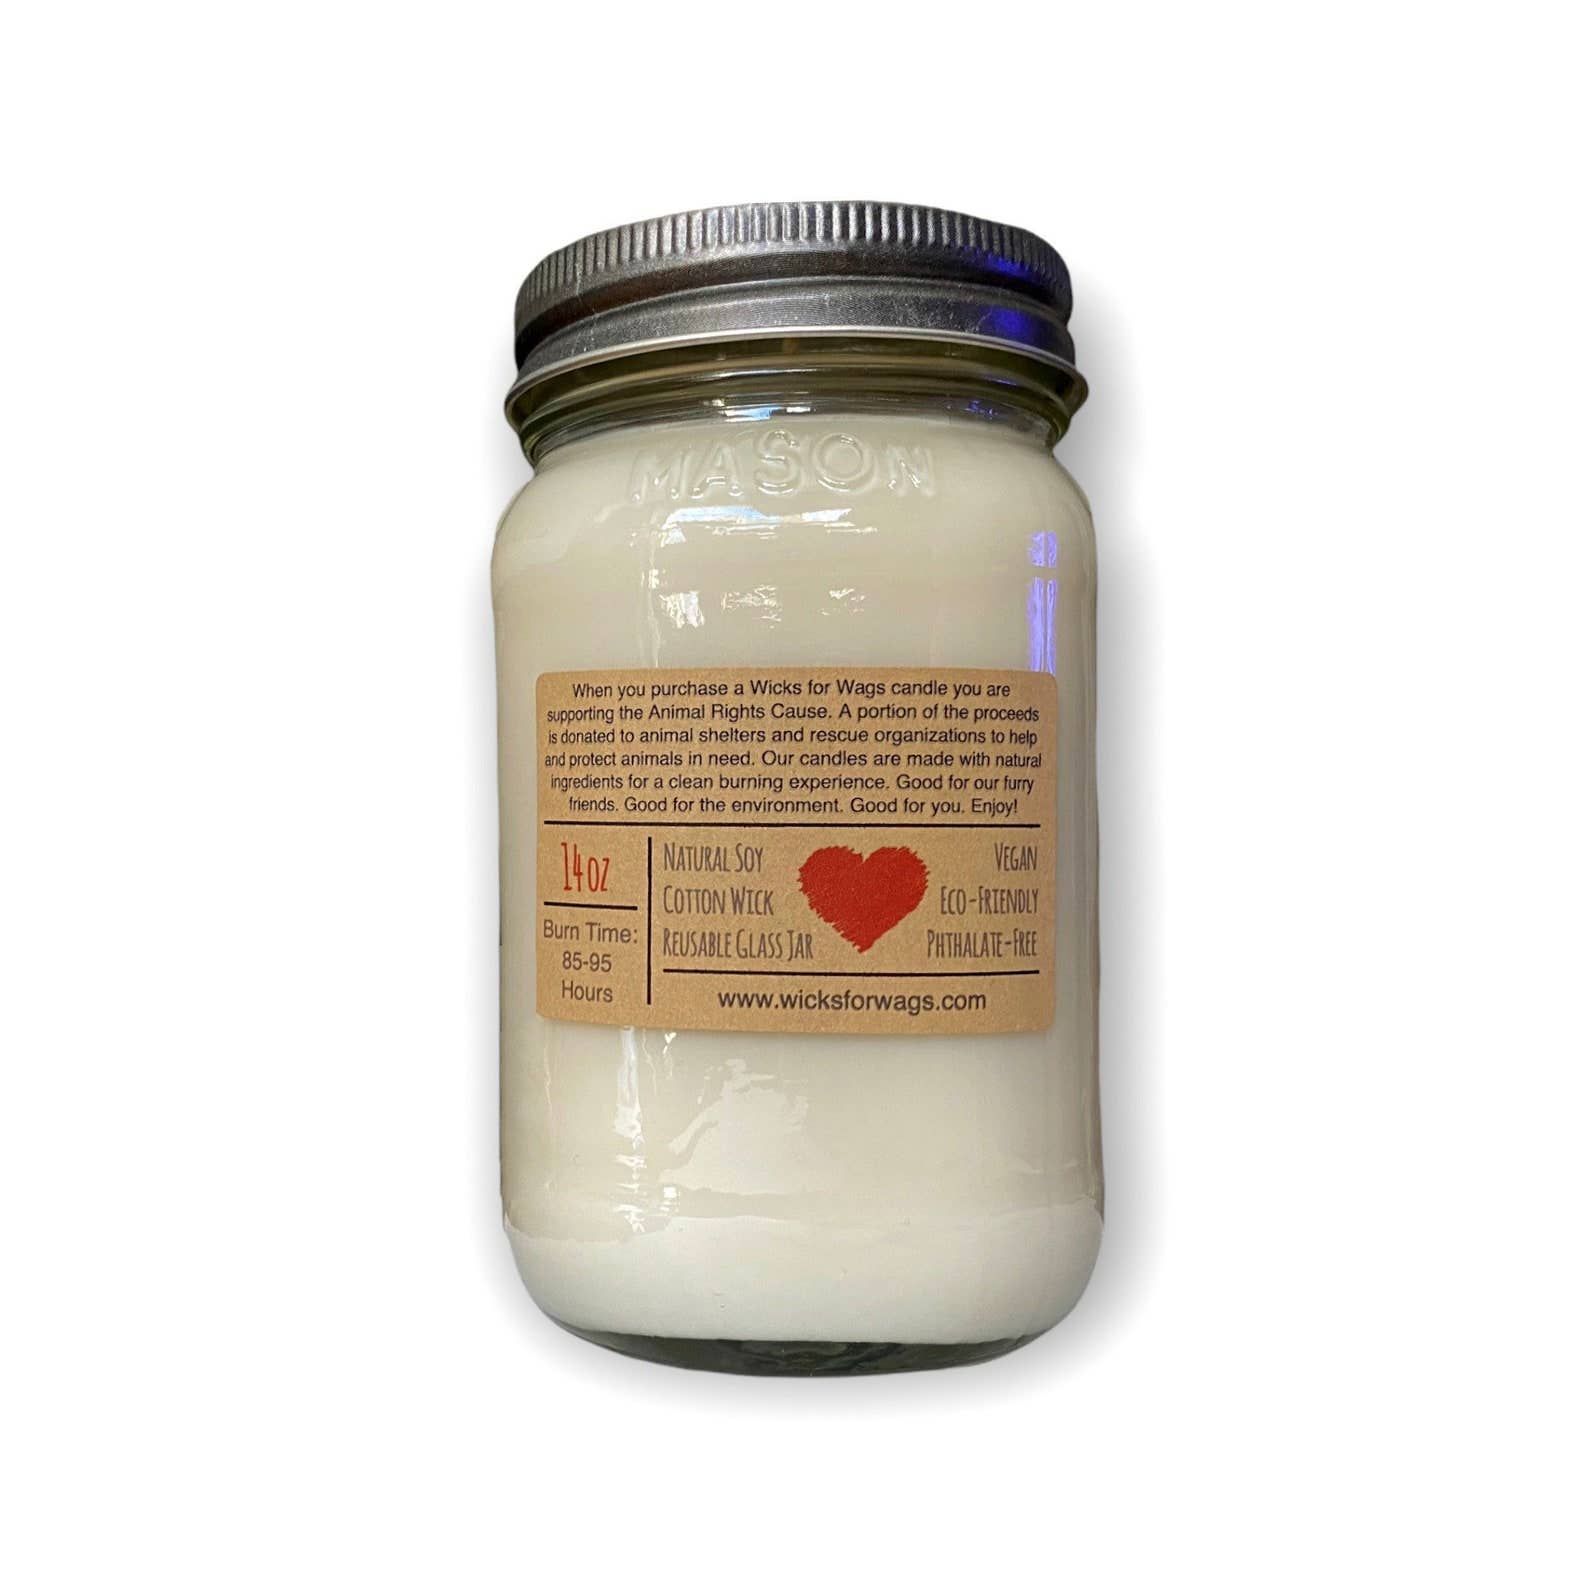 Wicks for Wags Candles - Sweet Cream + Cardamom | 14 oz Candle | Mason Jar Soy Candle  Wicks for Wags Candles   -better made easy-eco-friendly-sustainable-gifting